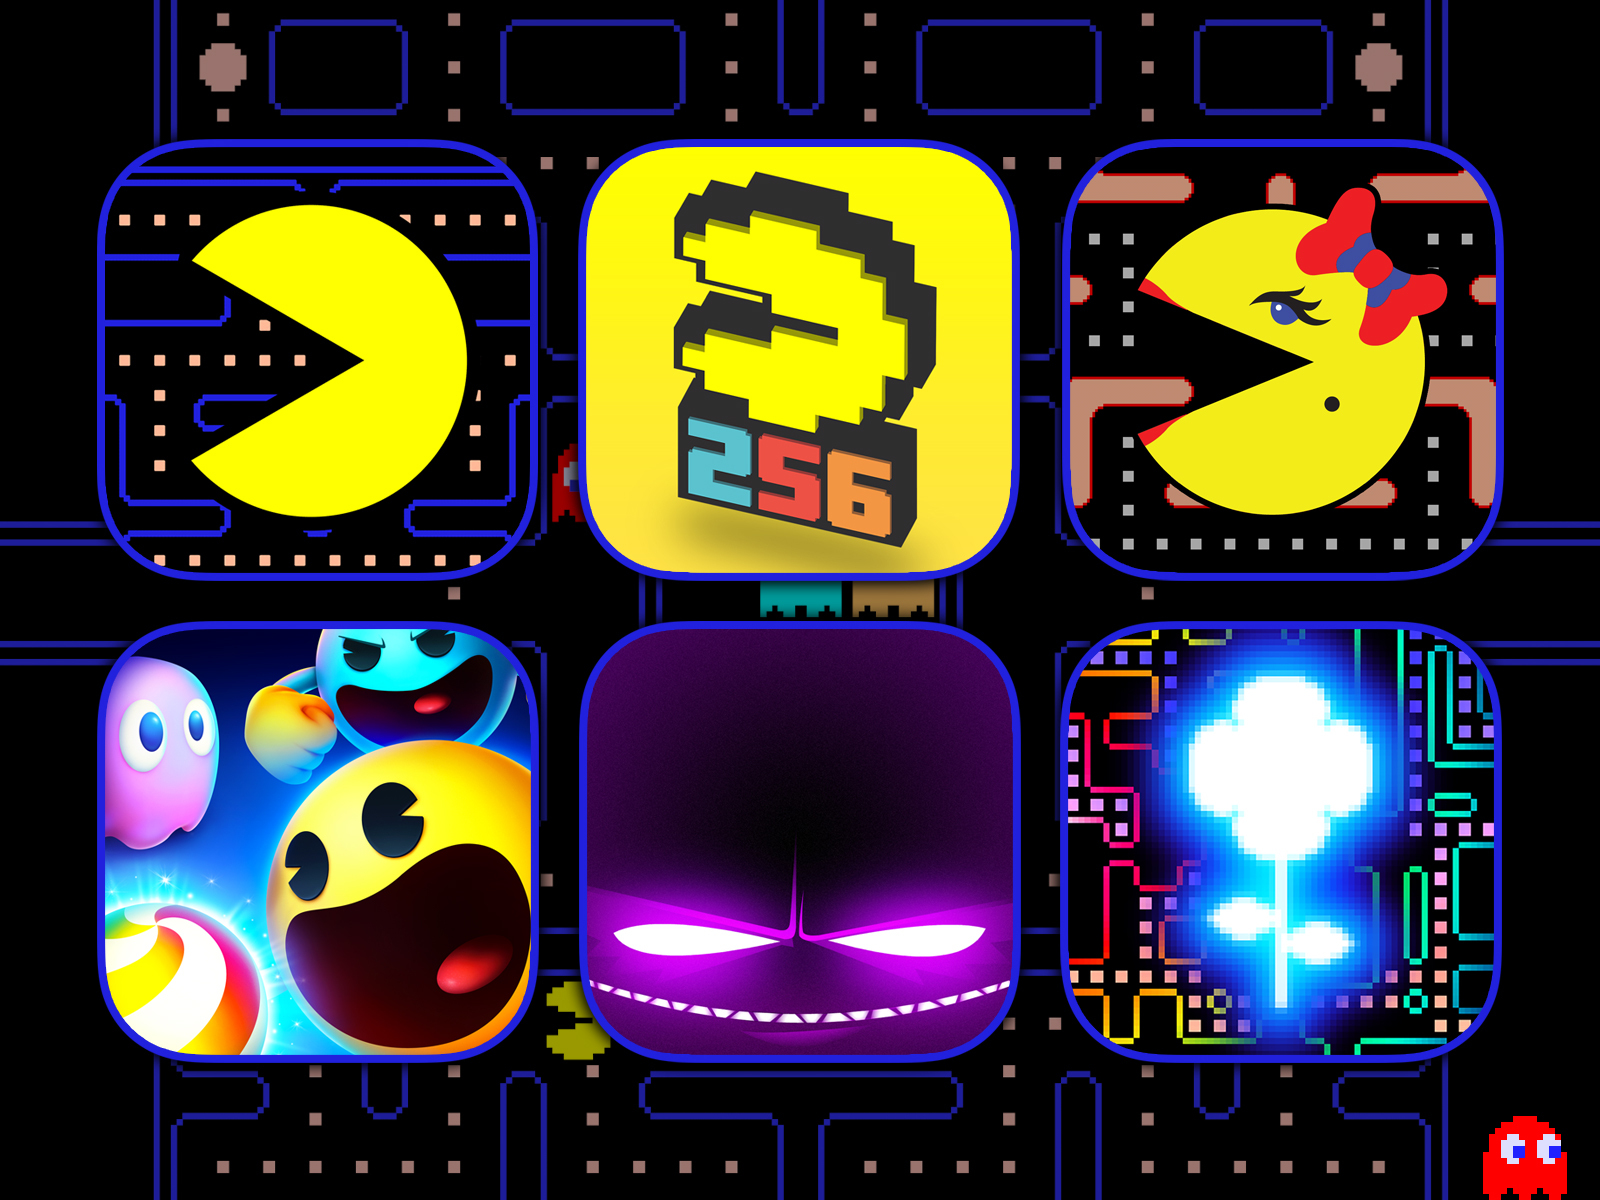 ms pacman game online free play no download